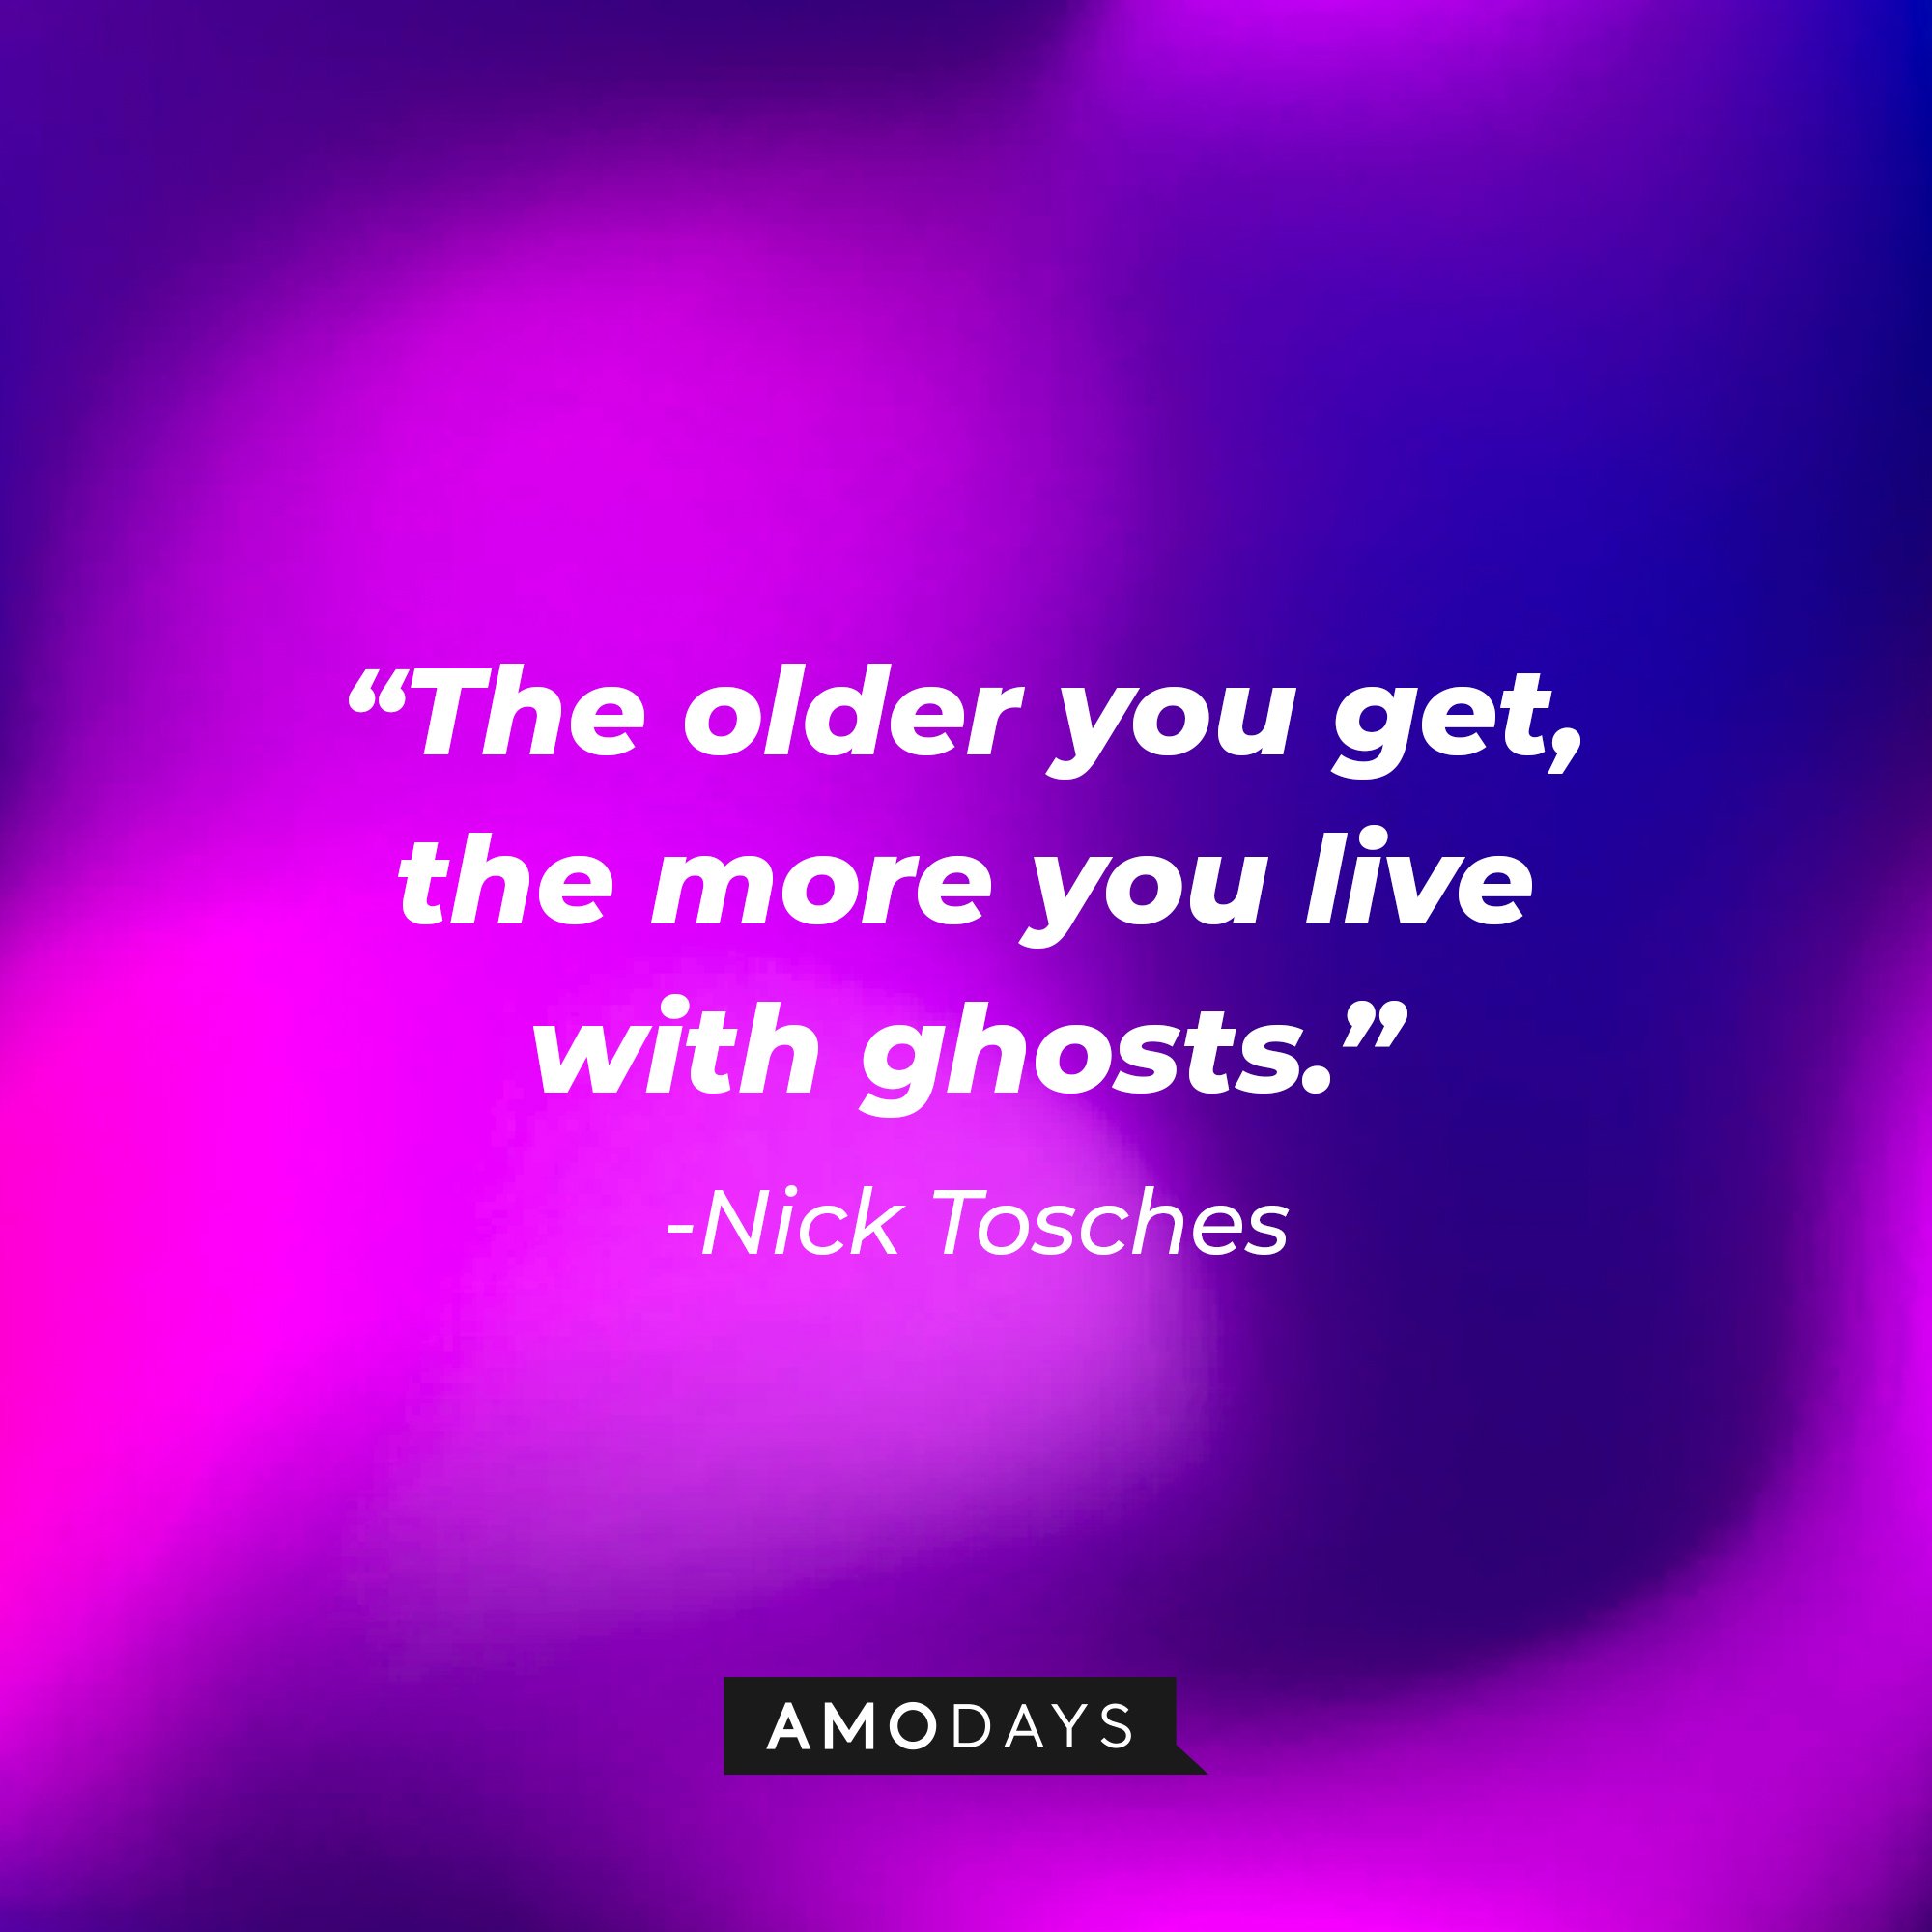 Nick Tosches' quote: "The older you get, the more you live with ghosts." | Image: AmoDays